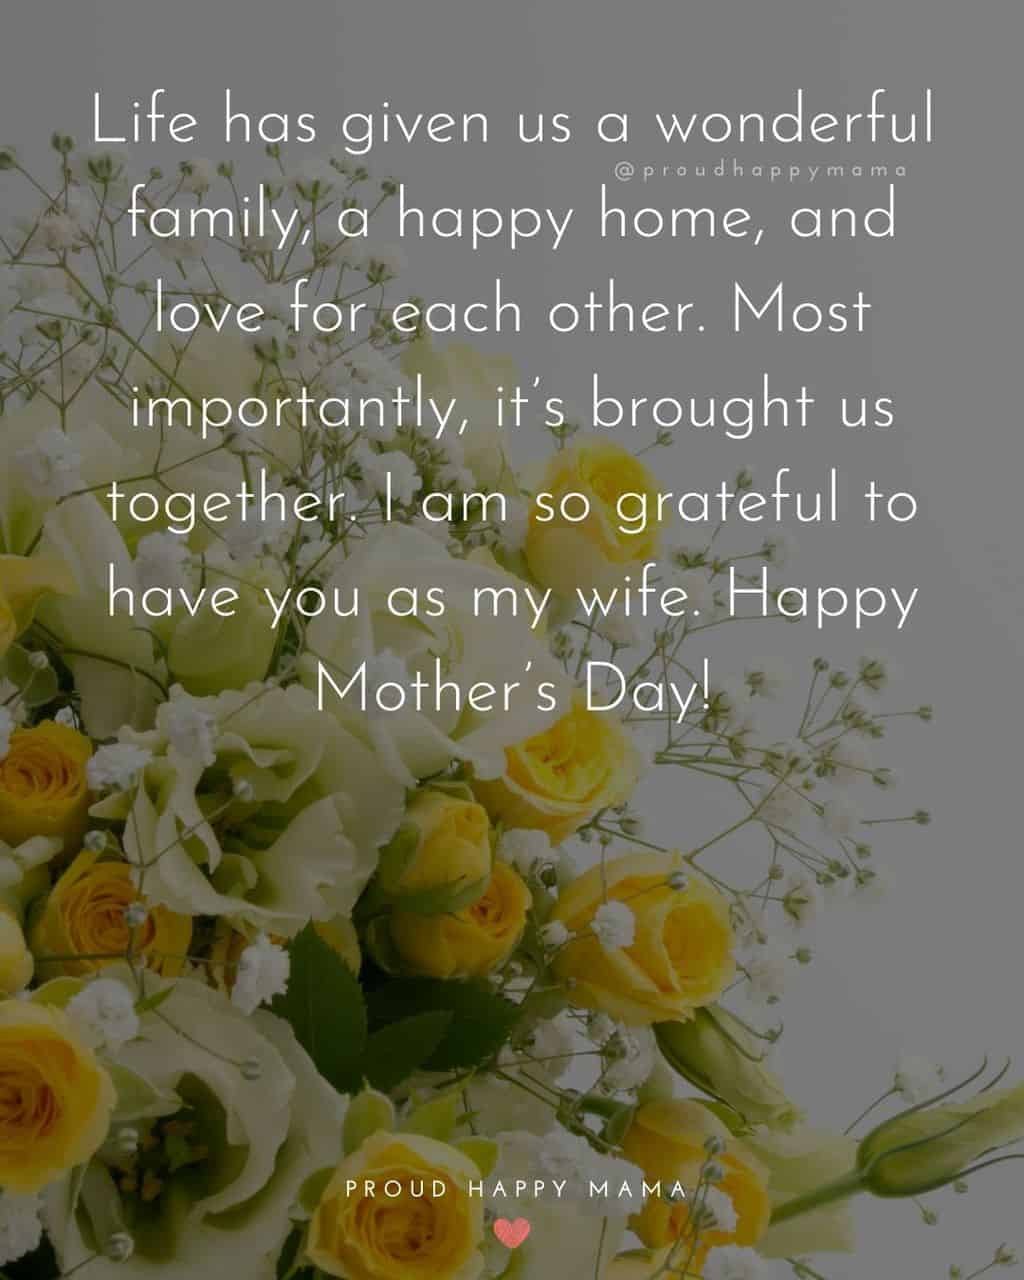 Happy Mothers Day Quotes For Wife - Life has given us a wonderful family, a happy home, and love for each other. Most